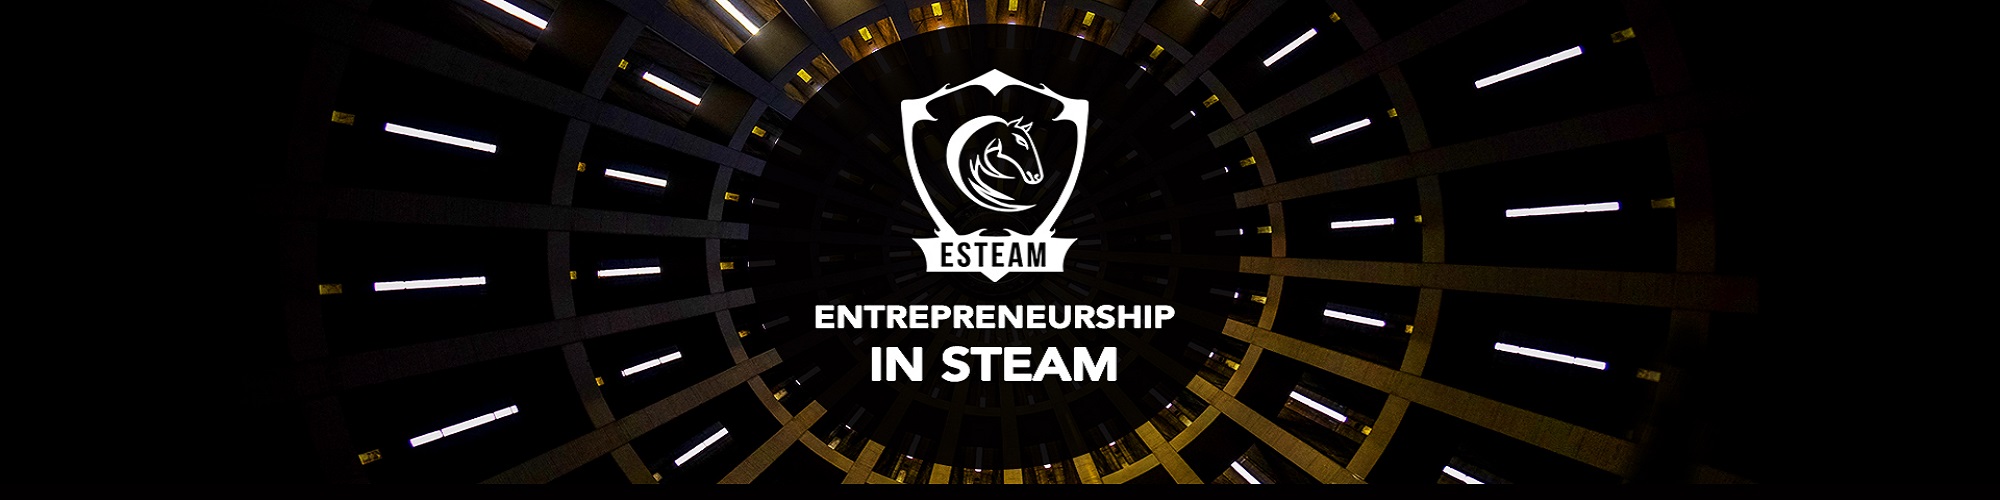 banner with esteam logo over minimalistic background